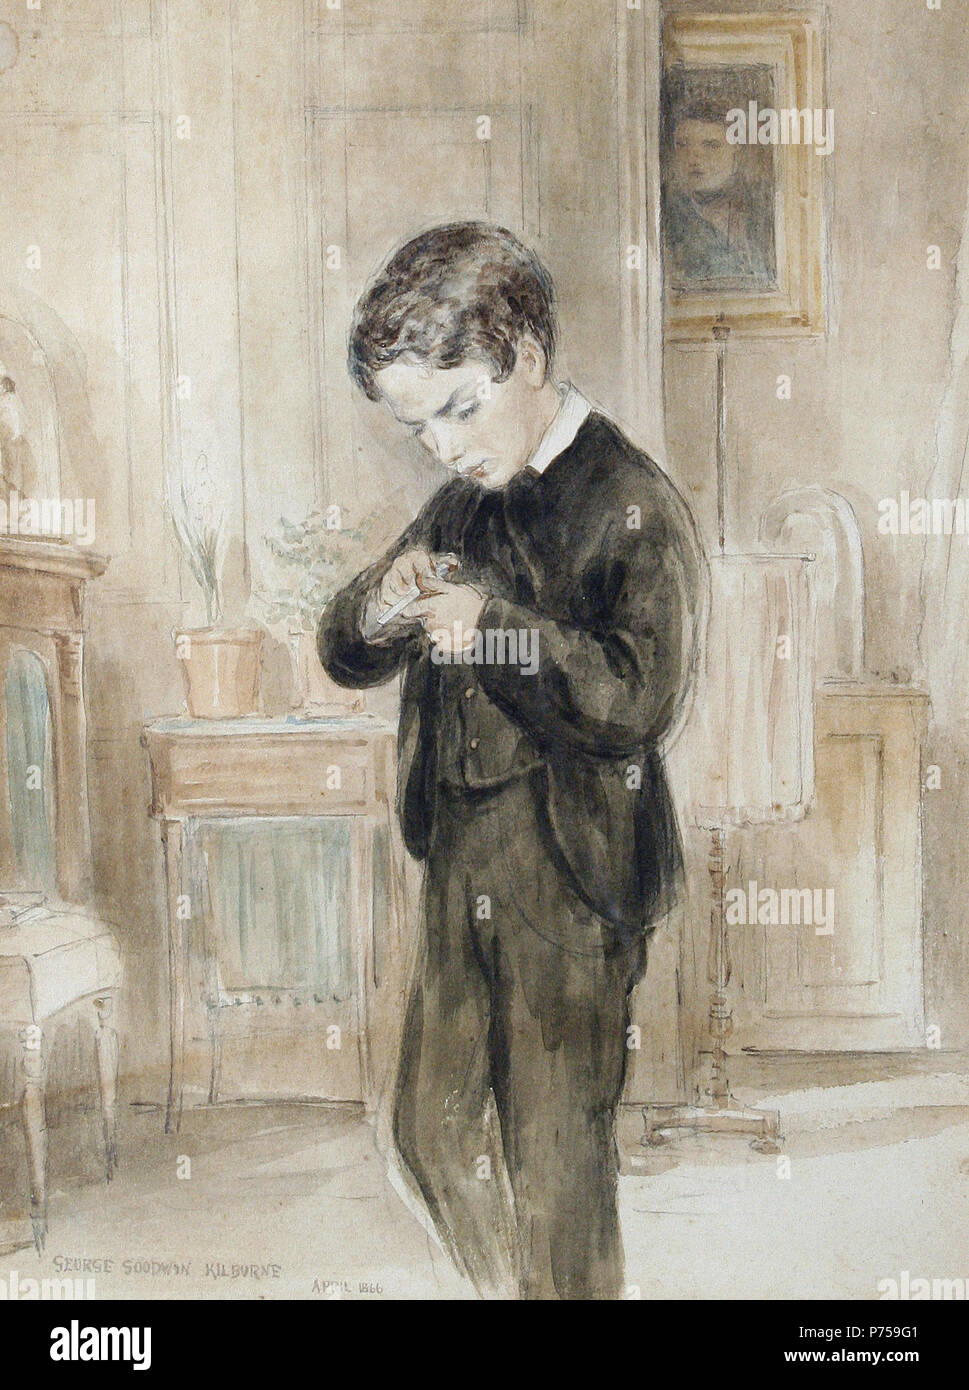 Eton schoolboy, signed and dated 'George Edwin Kilburne April 1866', watercolour and pencil, 31 x 23 cm . April 1866 126 George Goodwin Kilburne Eton schoolboy Stock Photo